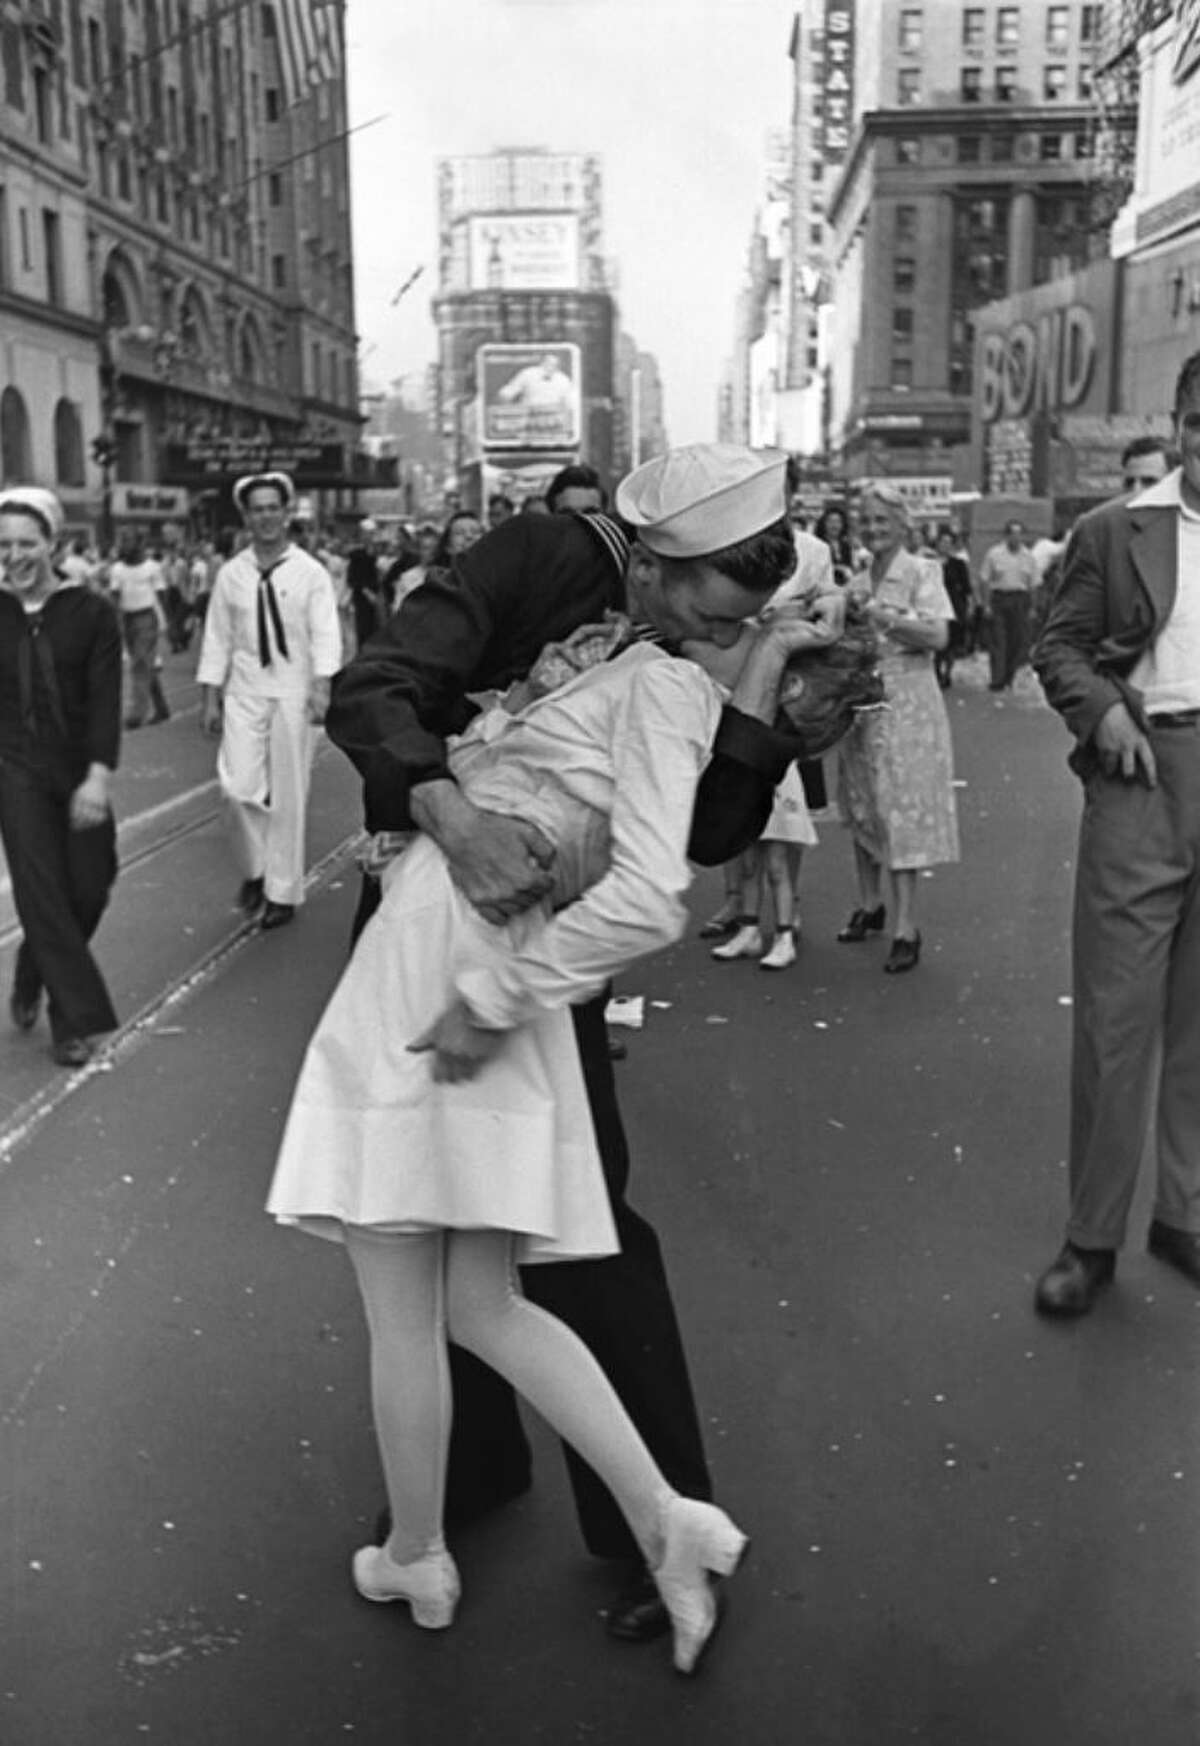 A group of physicists determine the precise time the iconic VJ Day photo was taken.